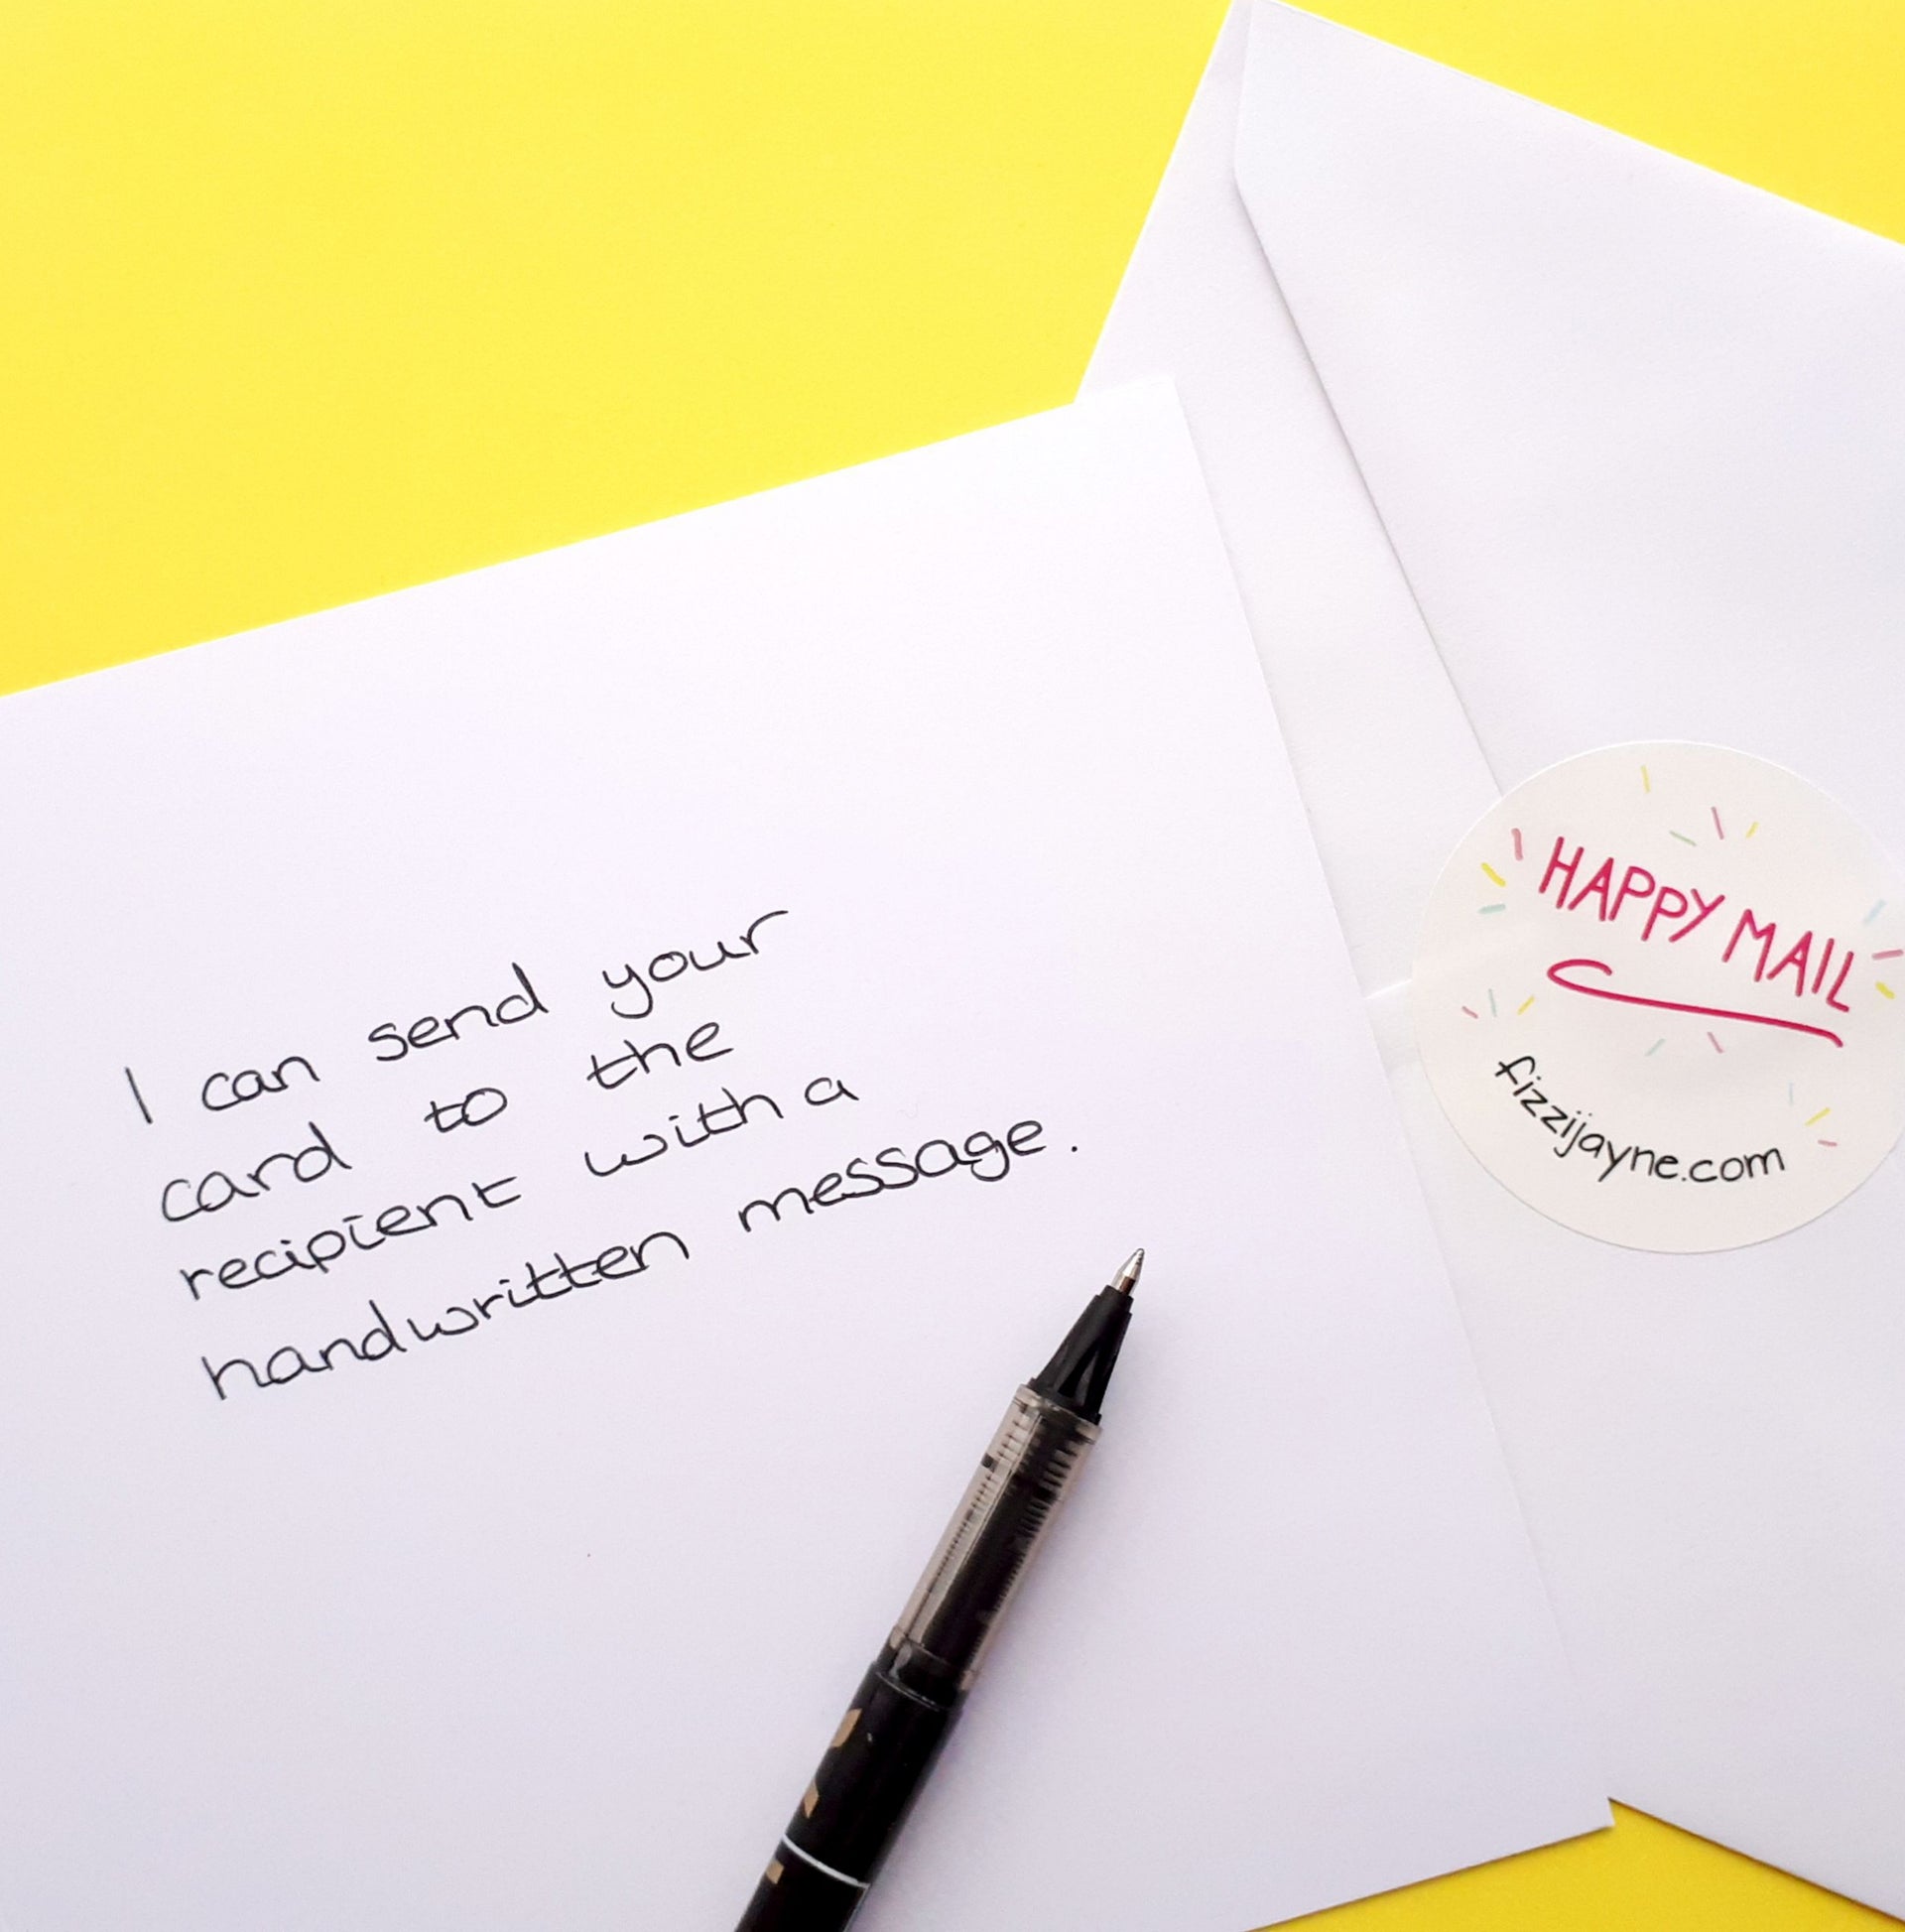 fizzijayne can send a card direct to the recipient with a handwritten message